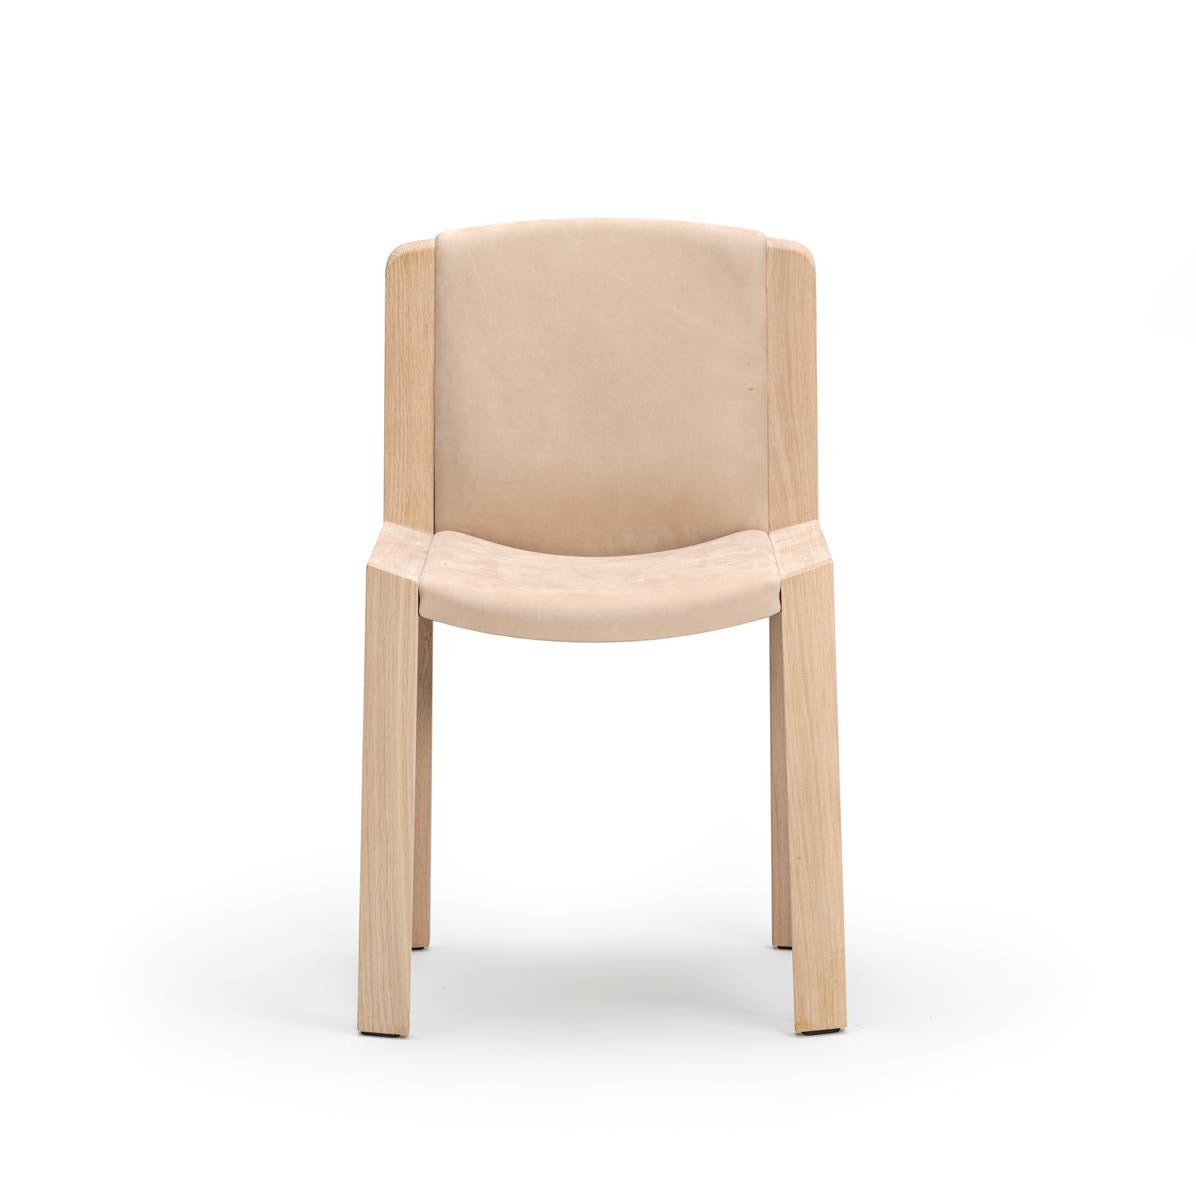 Joe Colombo 'Chair 300' Wood and Sørensen Leather Chair by Karakter For Sale 8